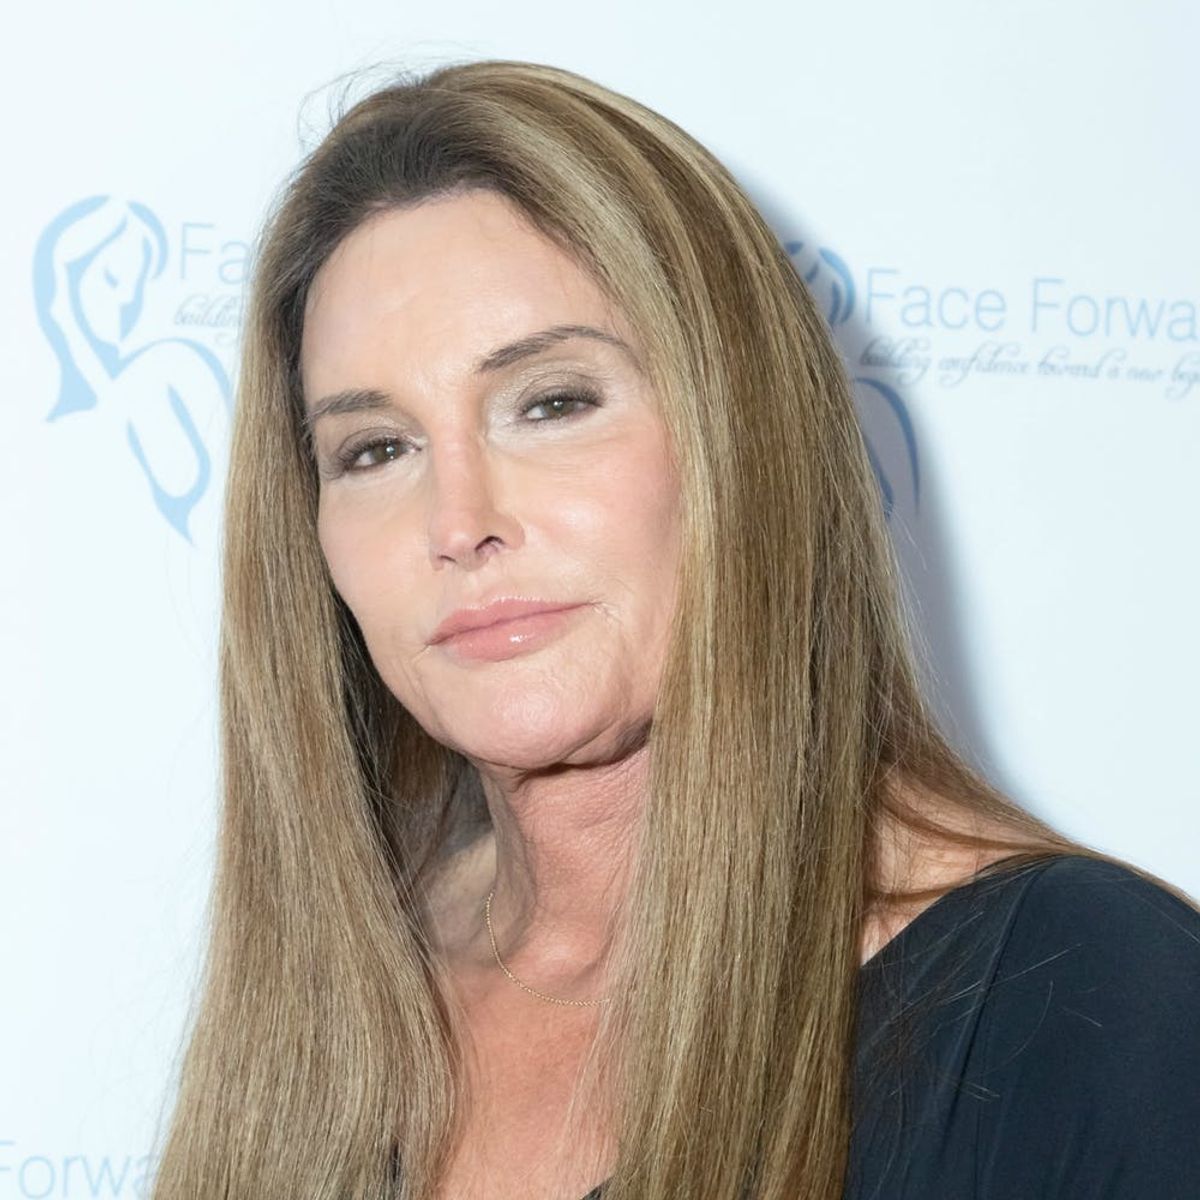 Caitlyn Jenner’s Anti-Trump Op-Ed Proves Her Privilege Still Clouds Her Activism